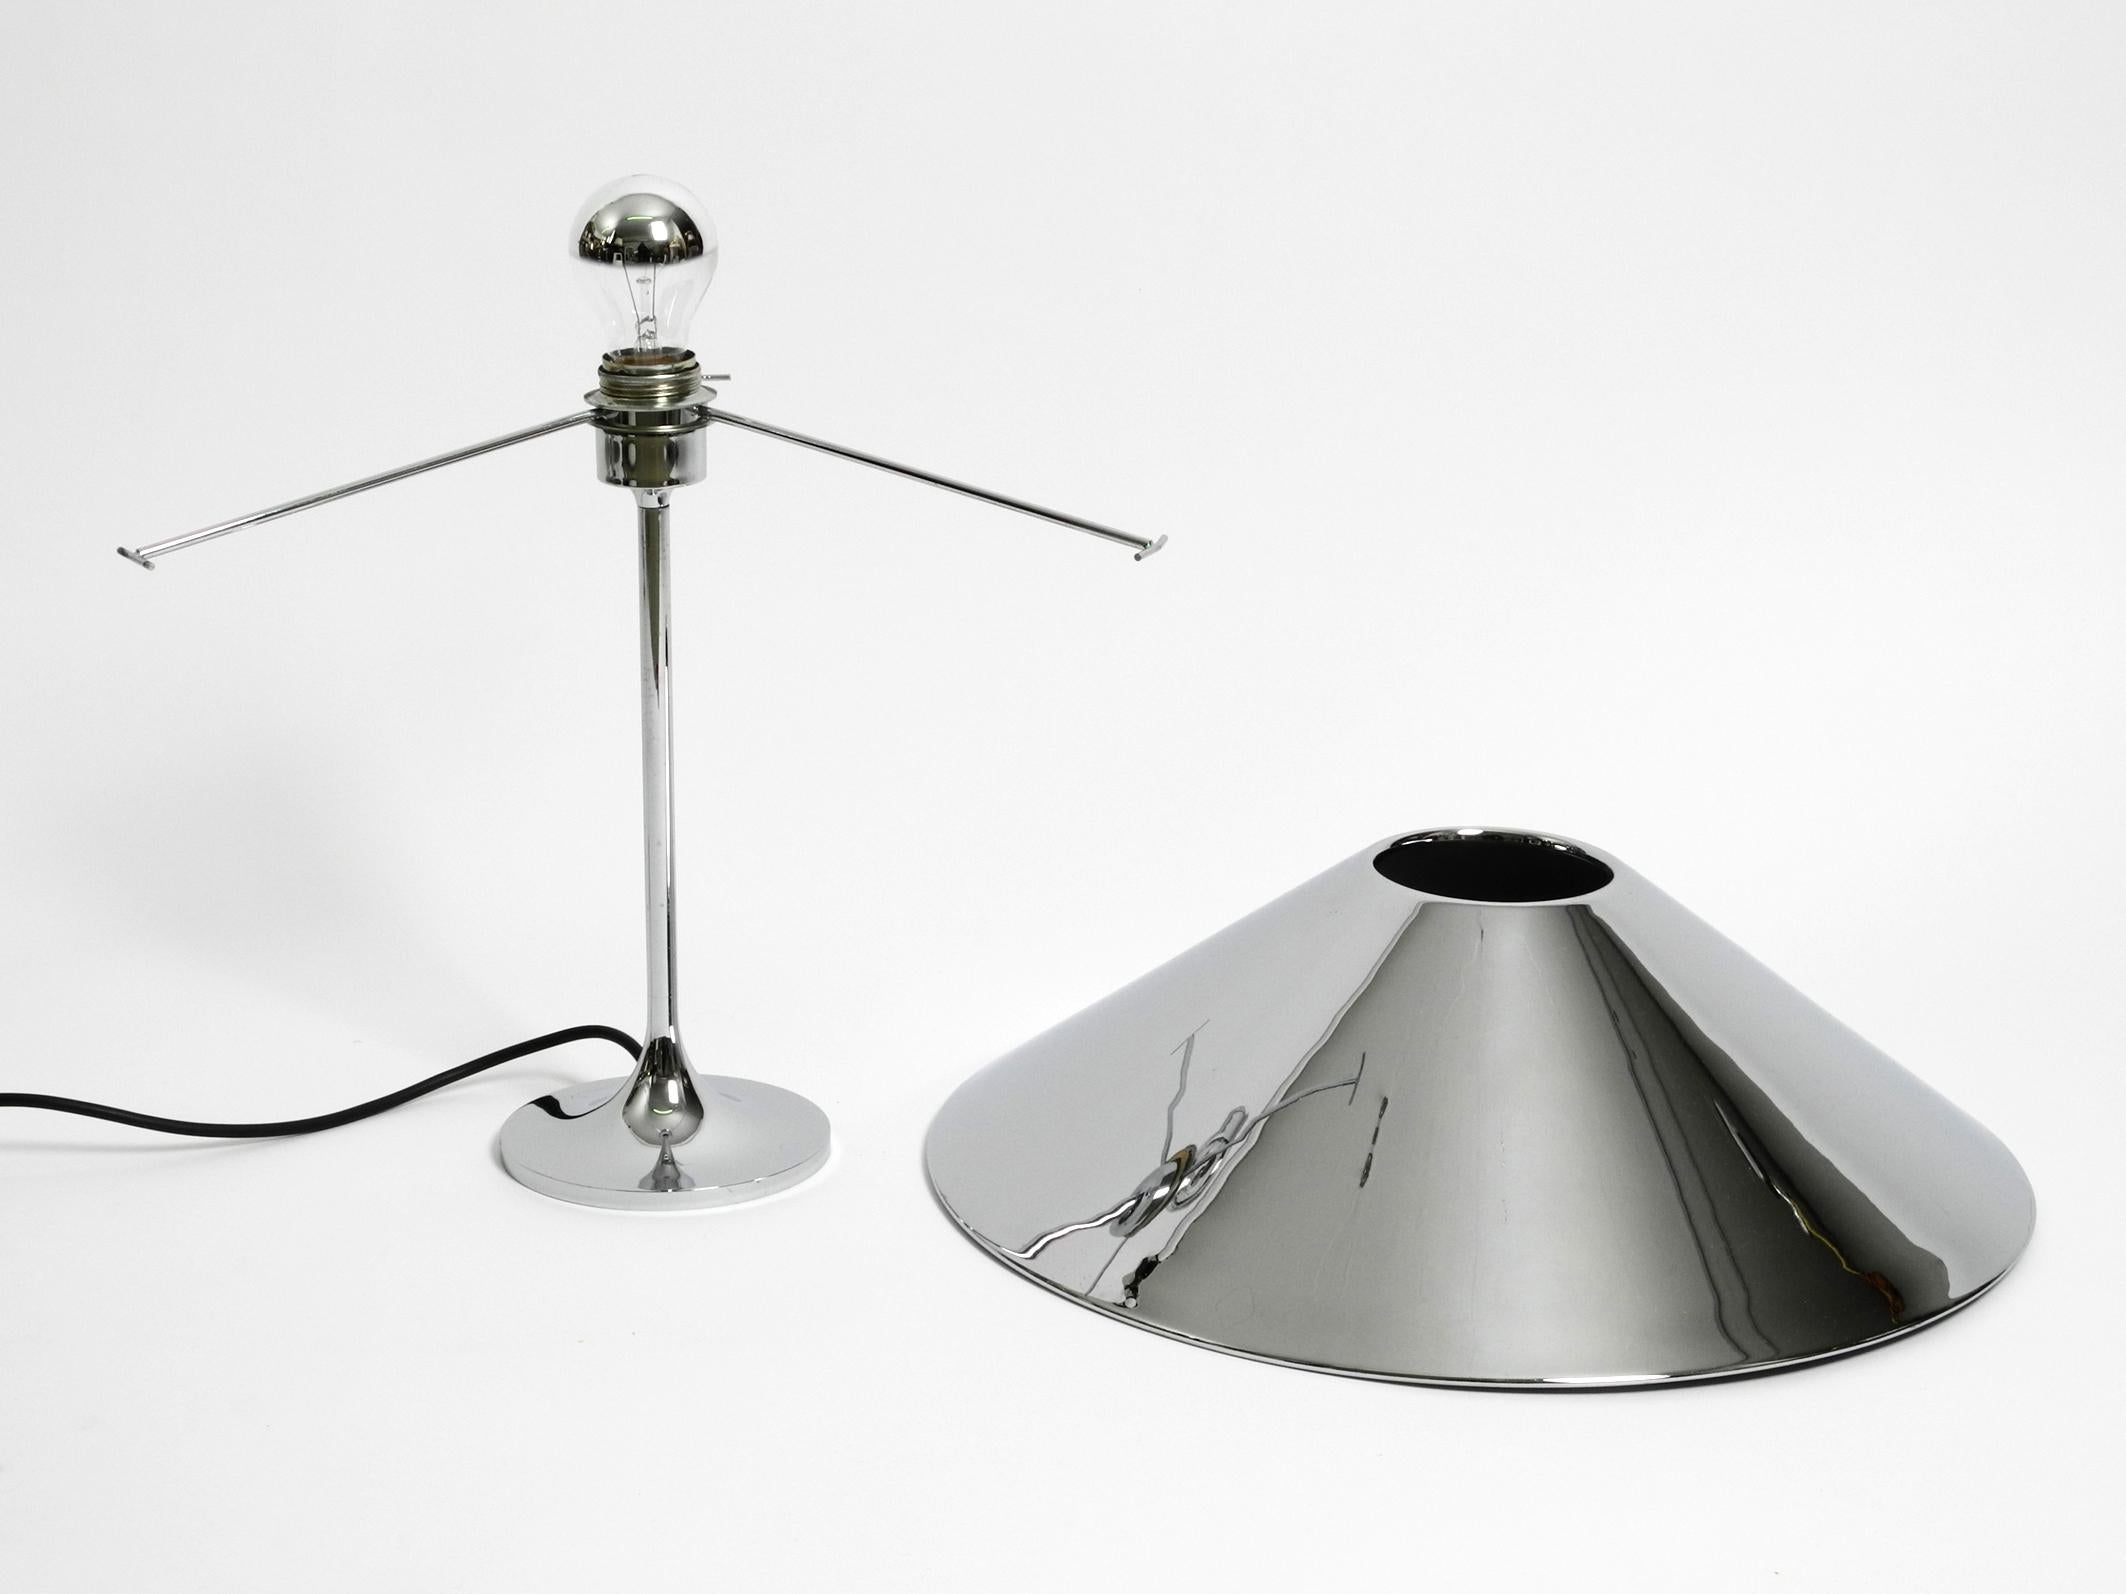 Space Age Large, Heavy 70s Metal Chrome Table Lamp with a Metal Shade in a Classic Design